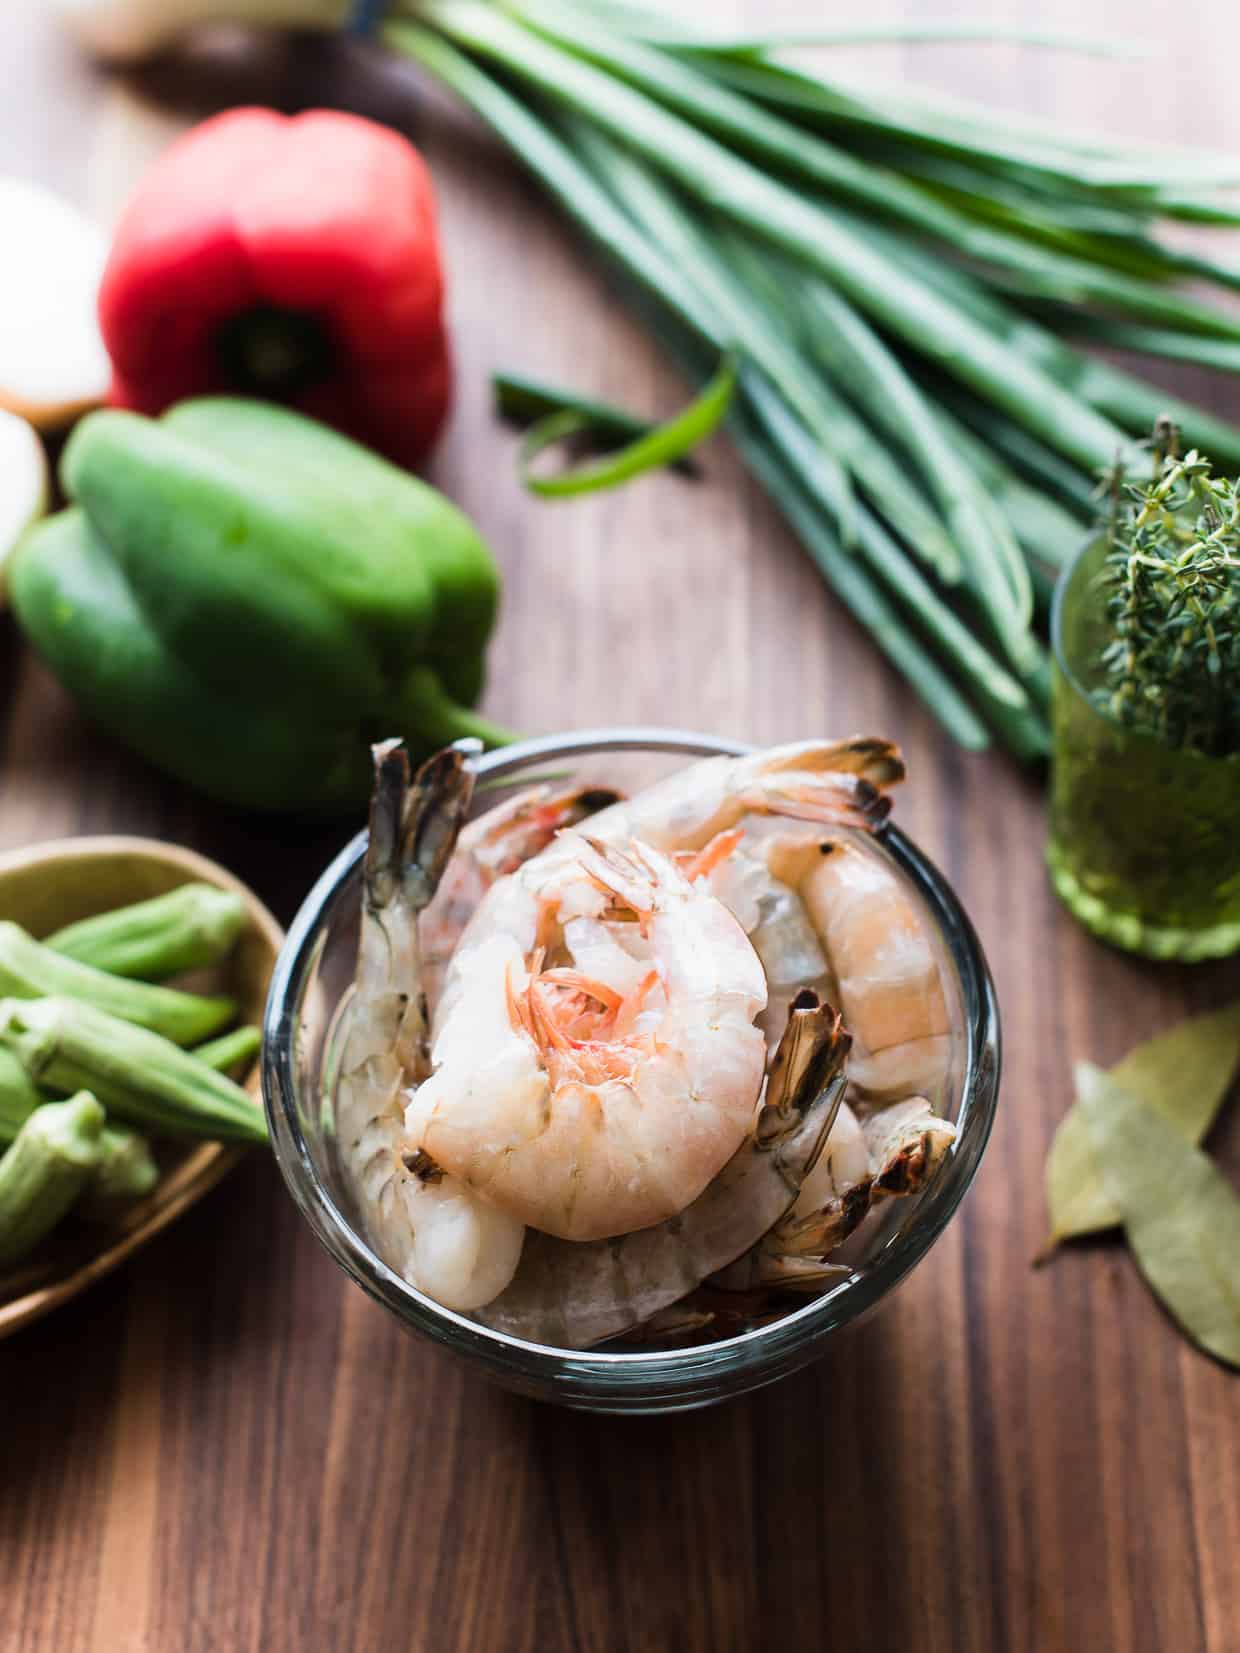 Fresh shrimp surrounded by bell peppers and other ingredients on a wooden surface.